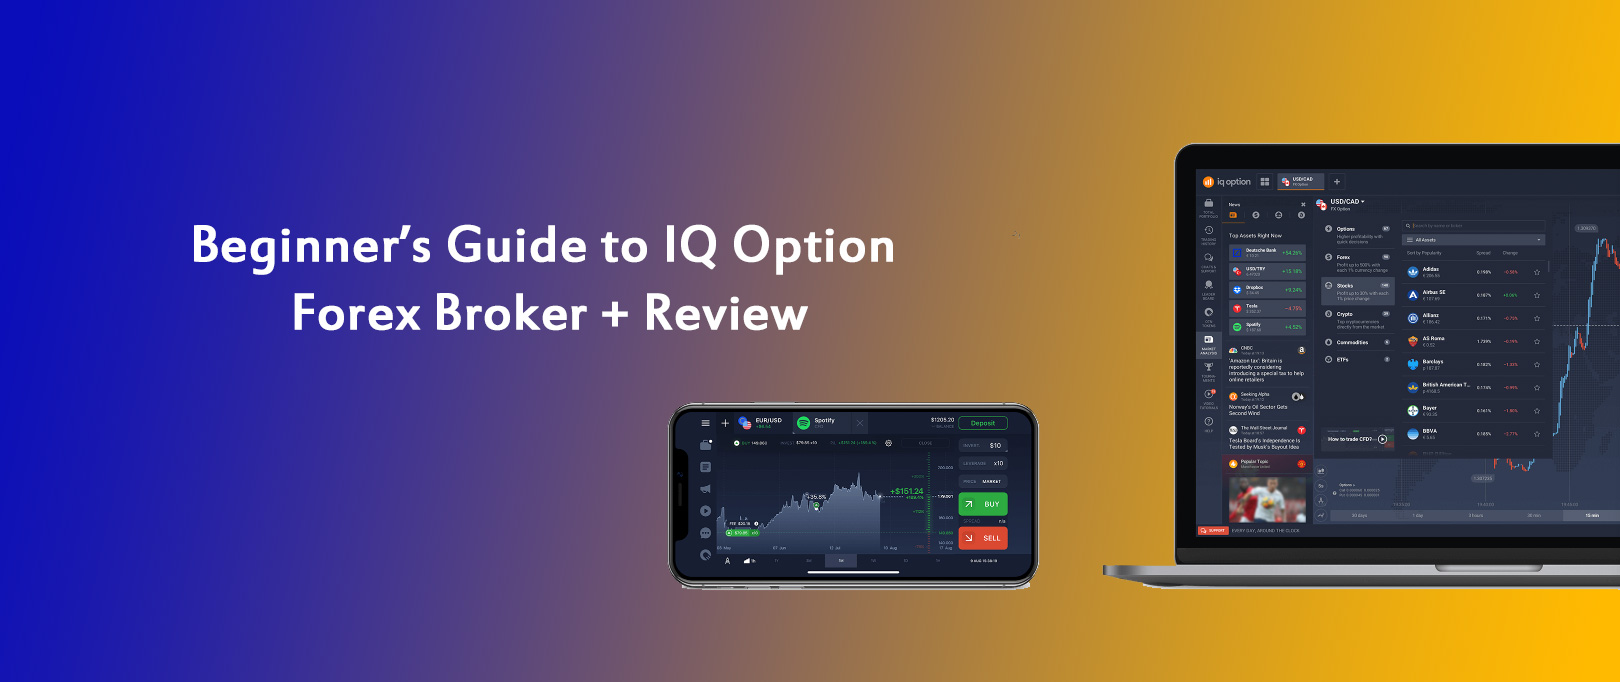 Beginner S Guide To Iq Option Forex Broker And Review Prathilaba - 